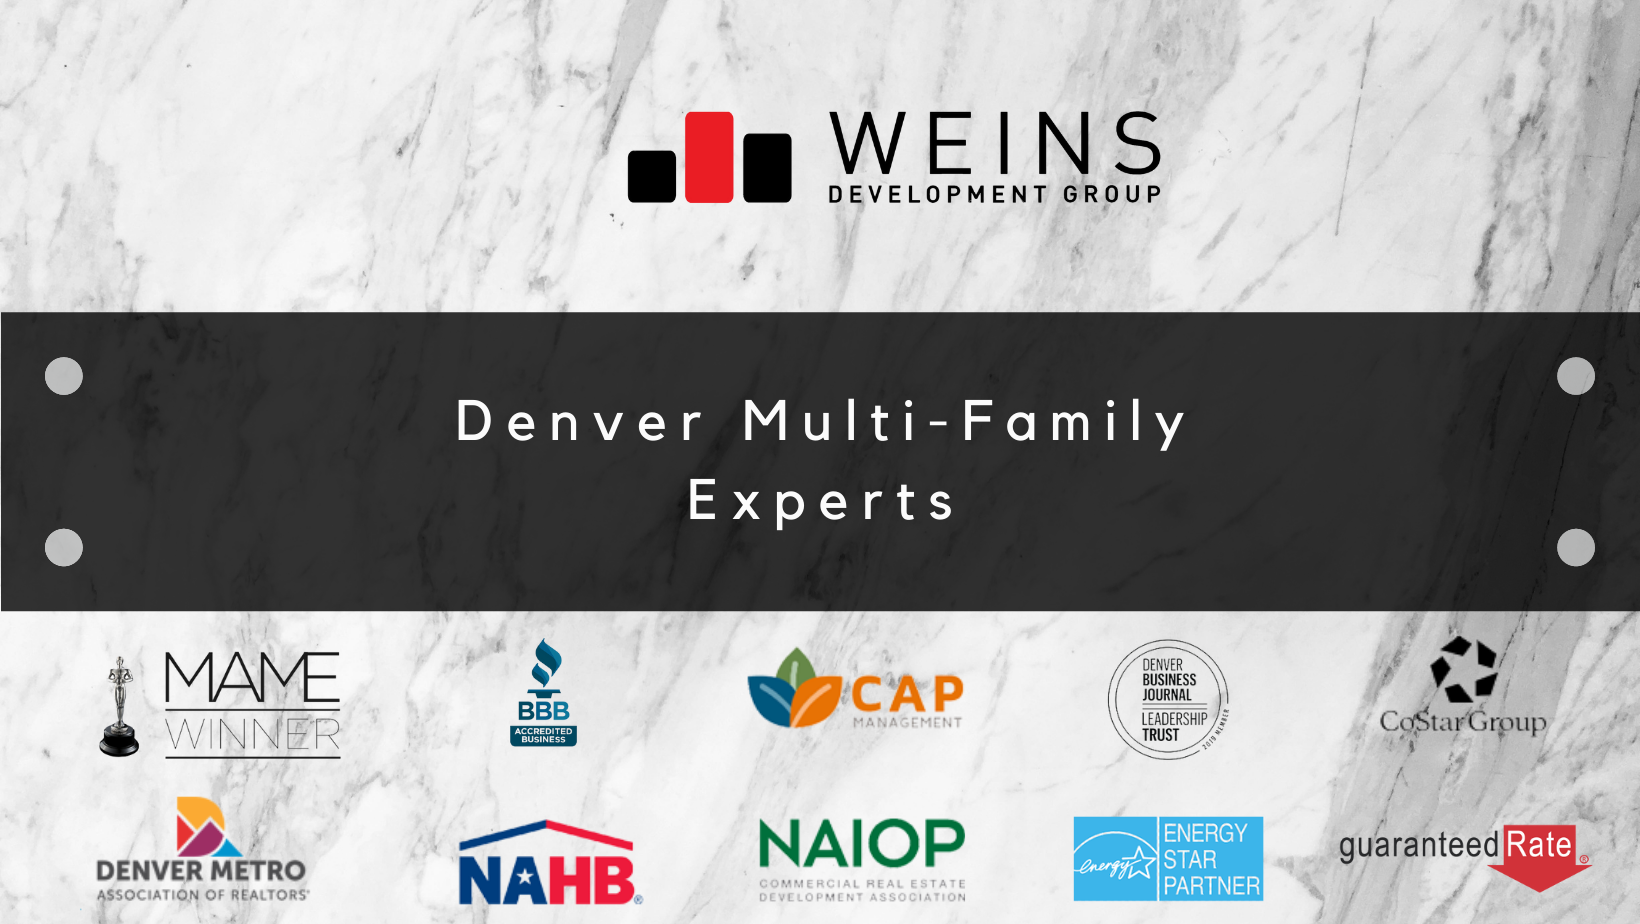 The Next Big Thing in Denver Real Estate: Weins Development Group - Best Denver, Colorado's Residential & Commercial Real Estate Developer - #1 High-quality Houses, Townhomes, Condos, apartments, retail & office Builder